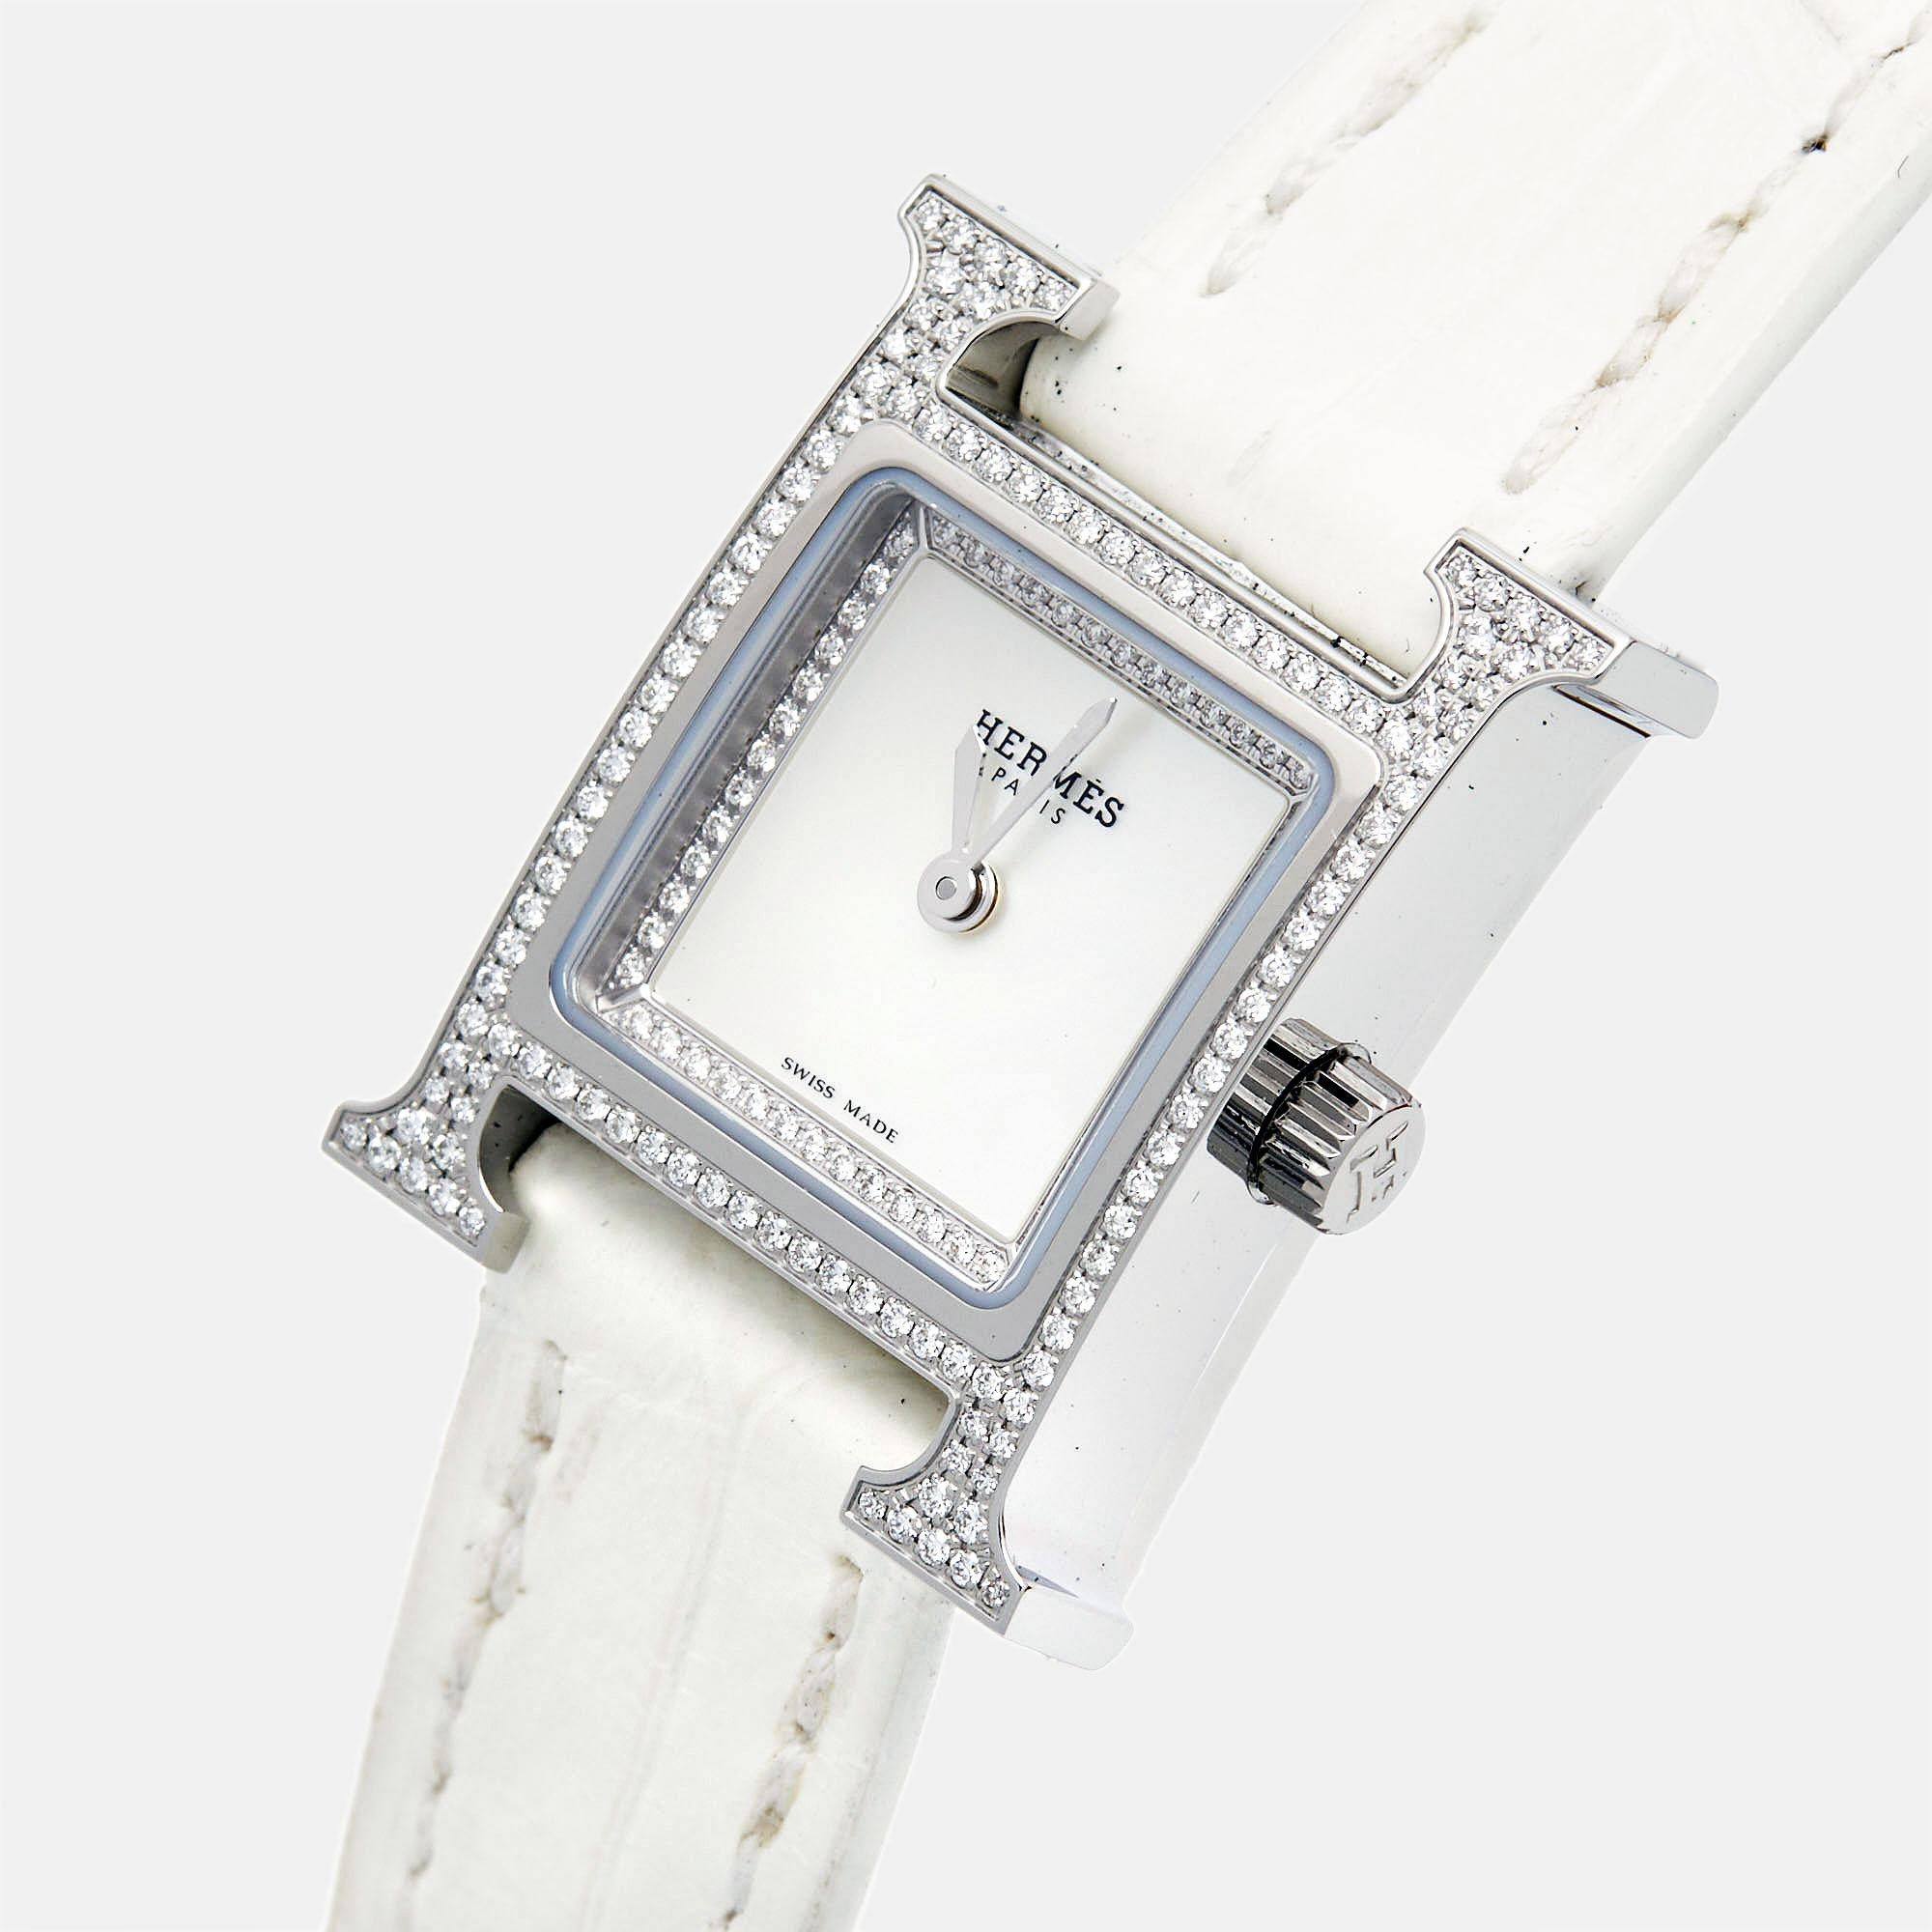 The Hermès Heure H watch is a masterpiece of elegance and luxury. Crafted with meticulous attention to detail, it features a stainless steel case adorned with diamonds, complemented by a stunning mother-of-pearl dial. The iconic H-shaped case design